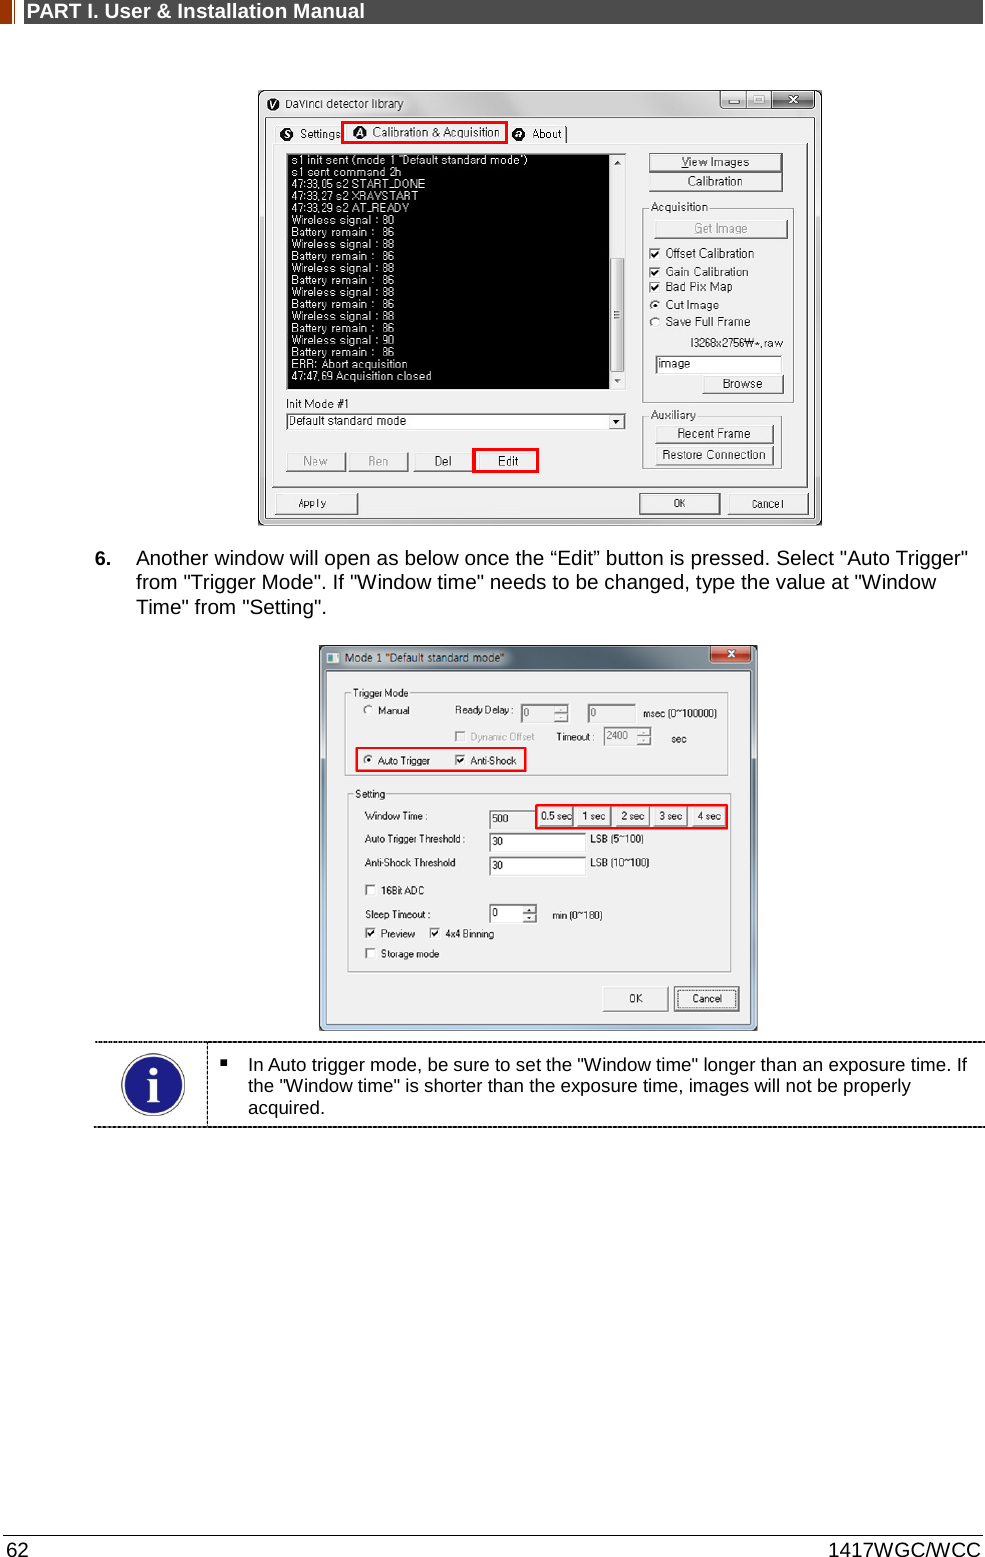 PART I. User &amp; Installation Manual 62 1417WGC/WCC  6. Another window will open as below once the “Edit” button is pressed. Select &quot;Auto Trigger&quot; from &quot;Trigger Mode&quot;. If &quot;Window time&quot; needs to be changed, type the value at &quot;Window Time&quot; from &quot;Setting&quot;.    In Auto trigger mode, be sure to set the &quot;Window time&quot; longer than an exposure time. If the &quot;Window time&quot; is shorter than the exposure time, images will not be properly acquired.   